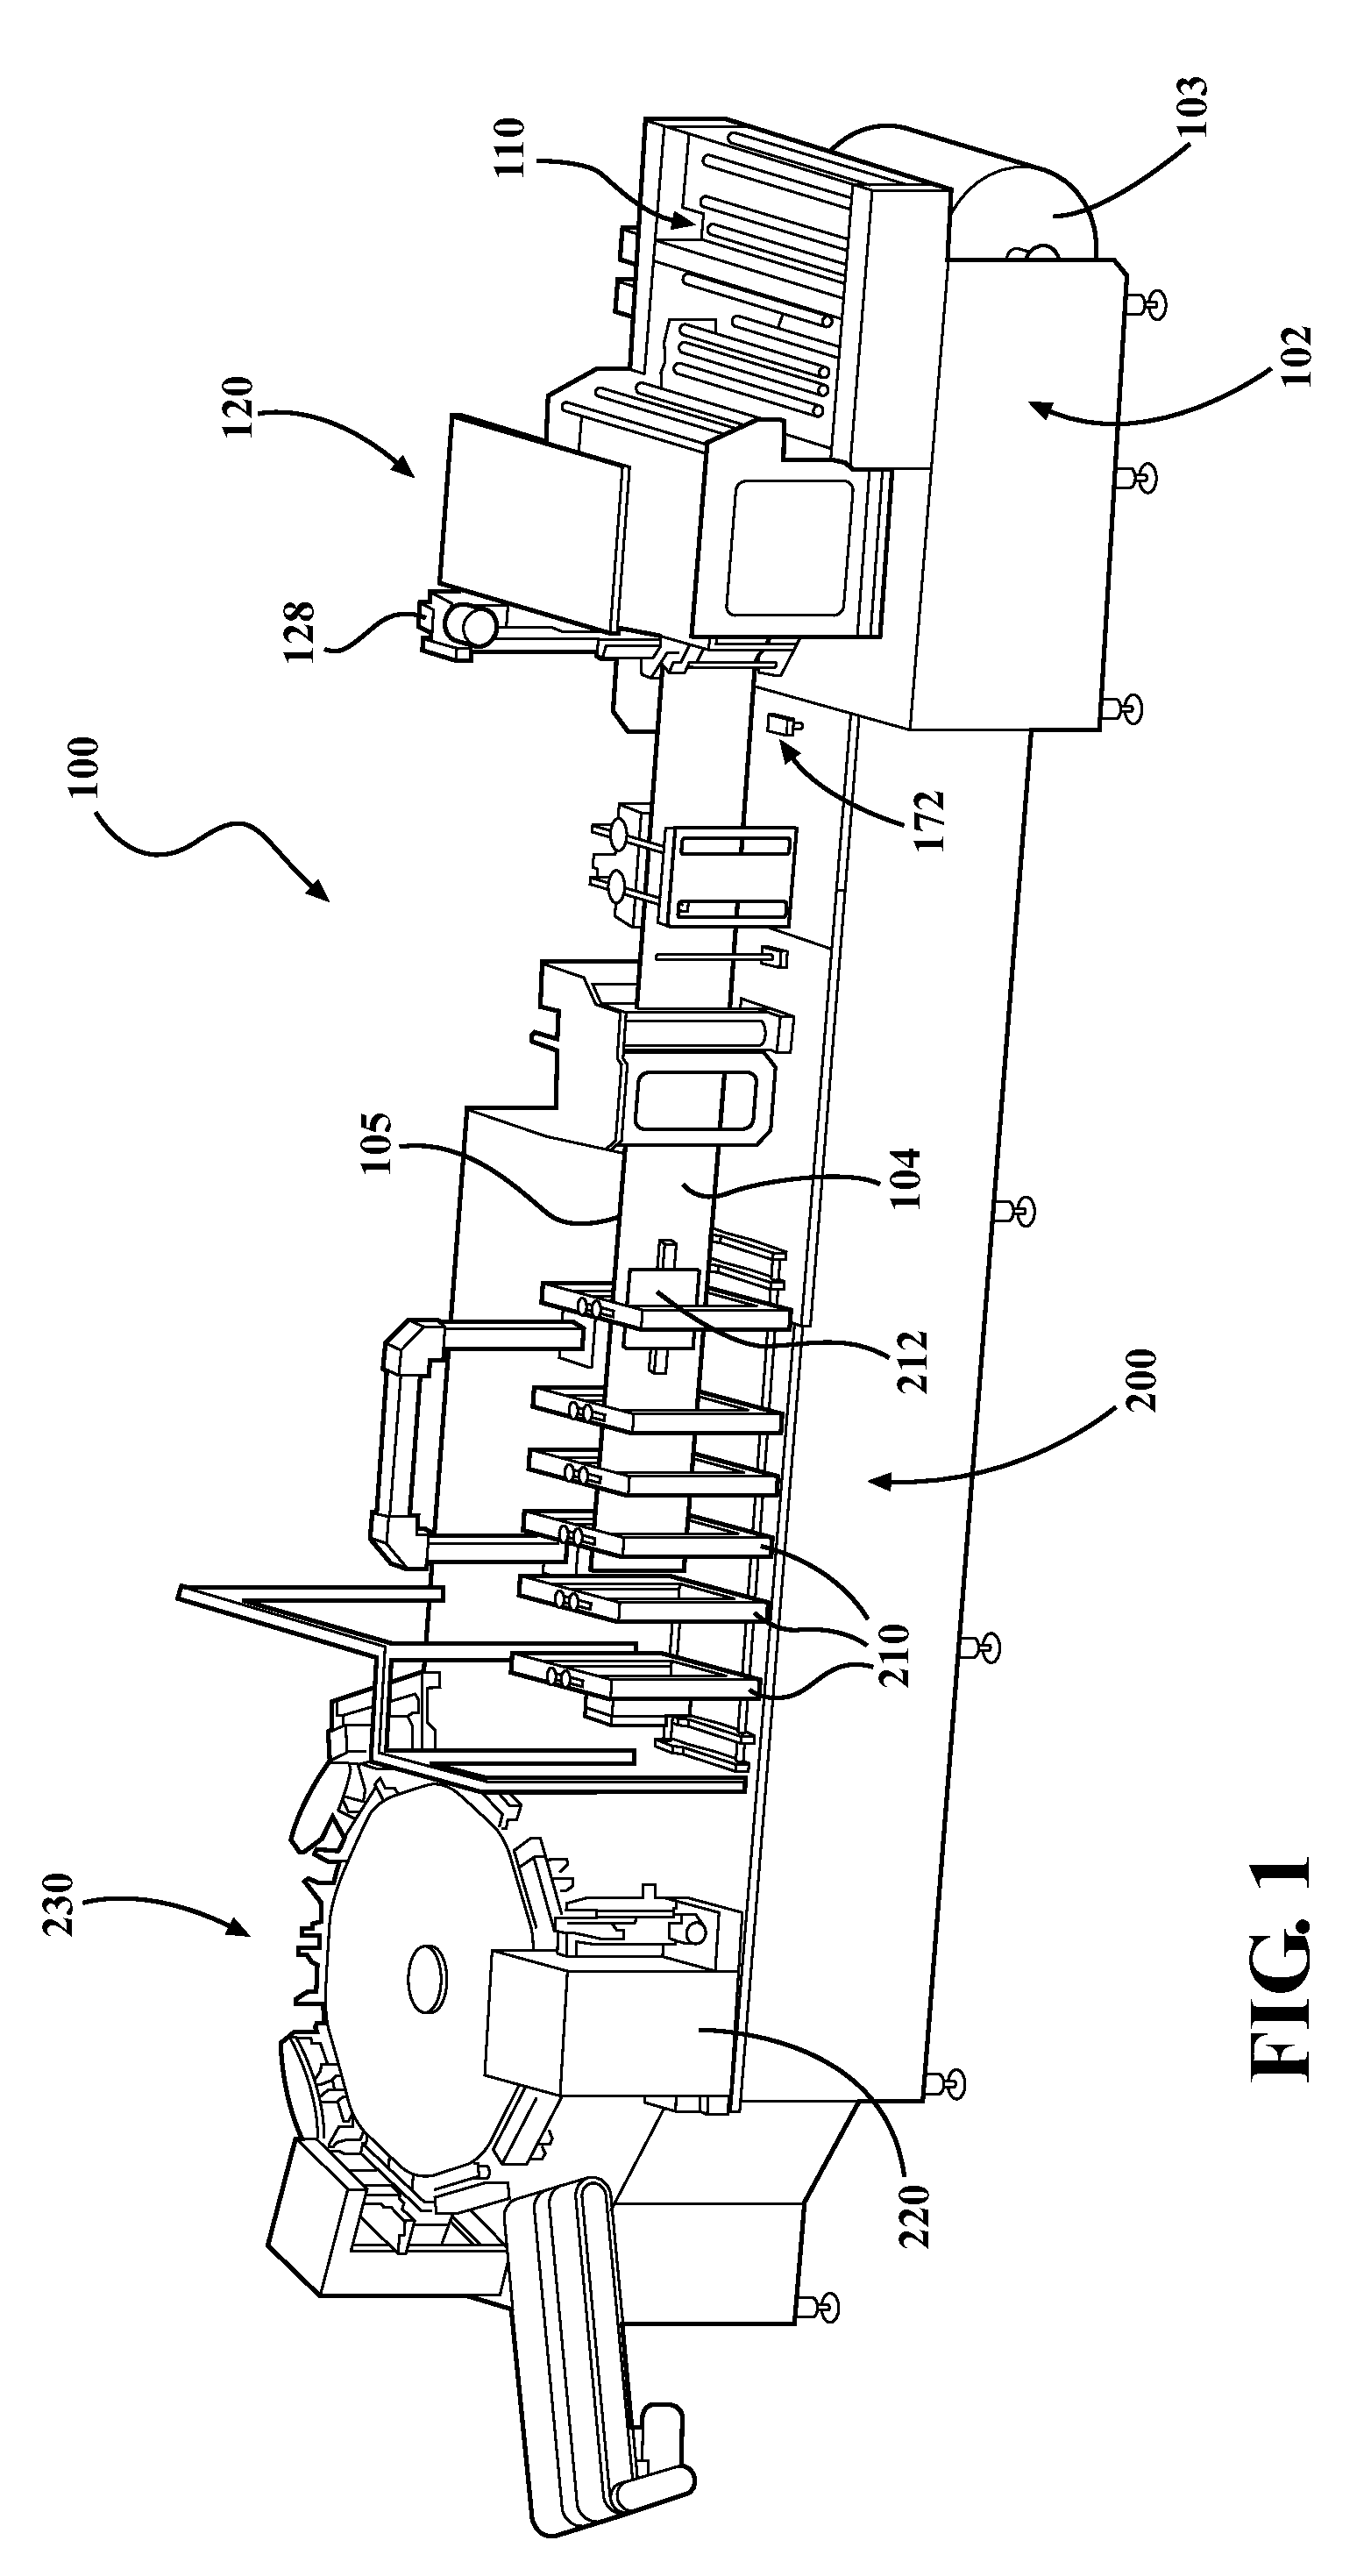 Apparatus for forming a plurality of flexible pouches from a continuous web of film